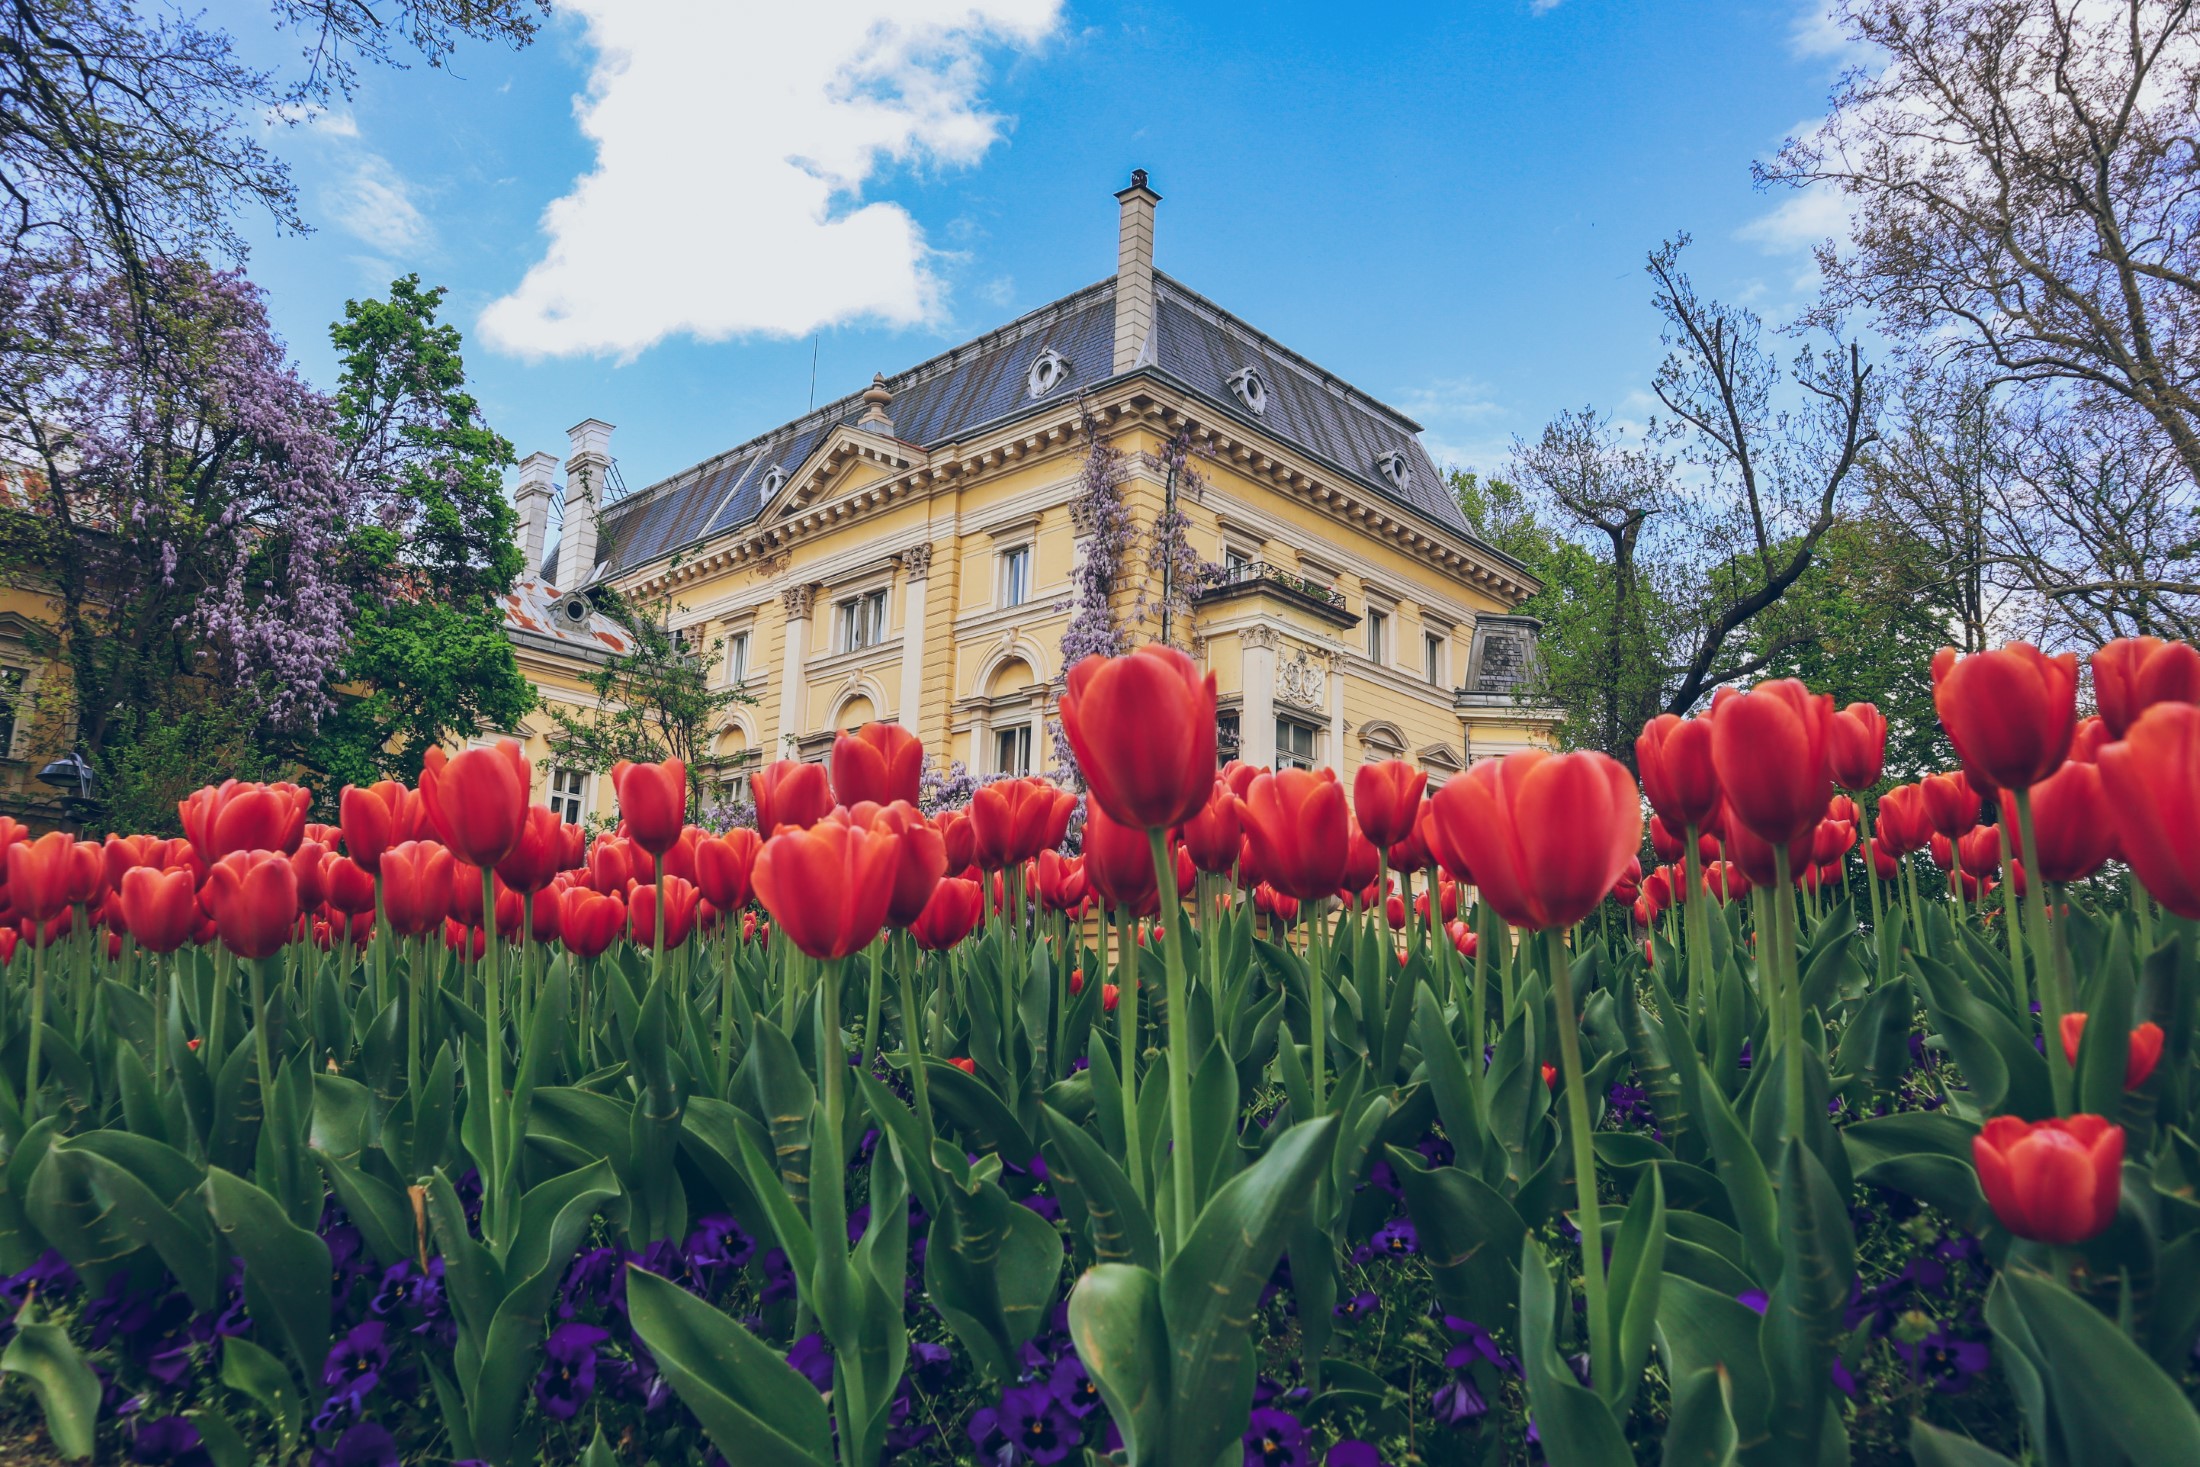 National Art Gallery(former Royal palace) in Sofia, Bulgaria with tulips in the foreground. Sofia during spring time in May. Best time to visit Sofia, Bulgaria.